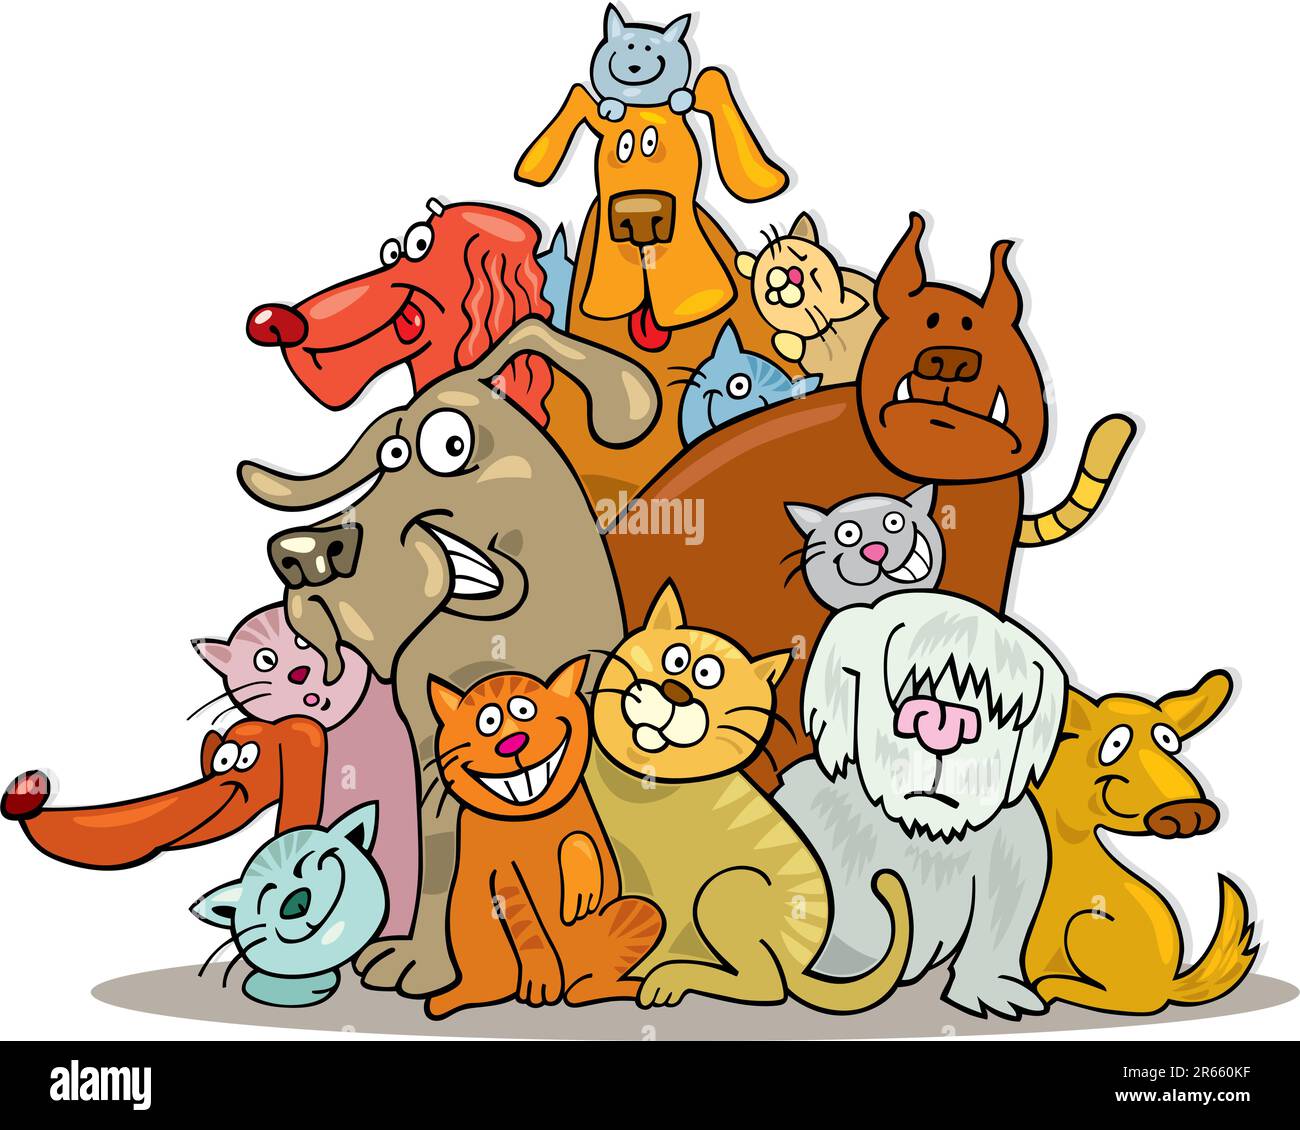 Illustration of Cats and Dogs group in friendship Stock Vector